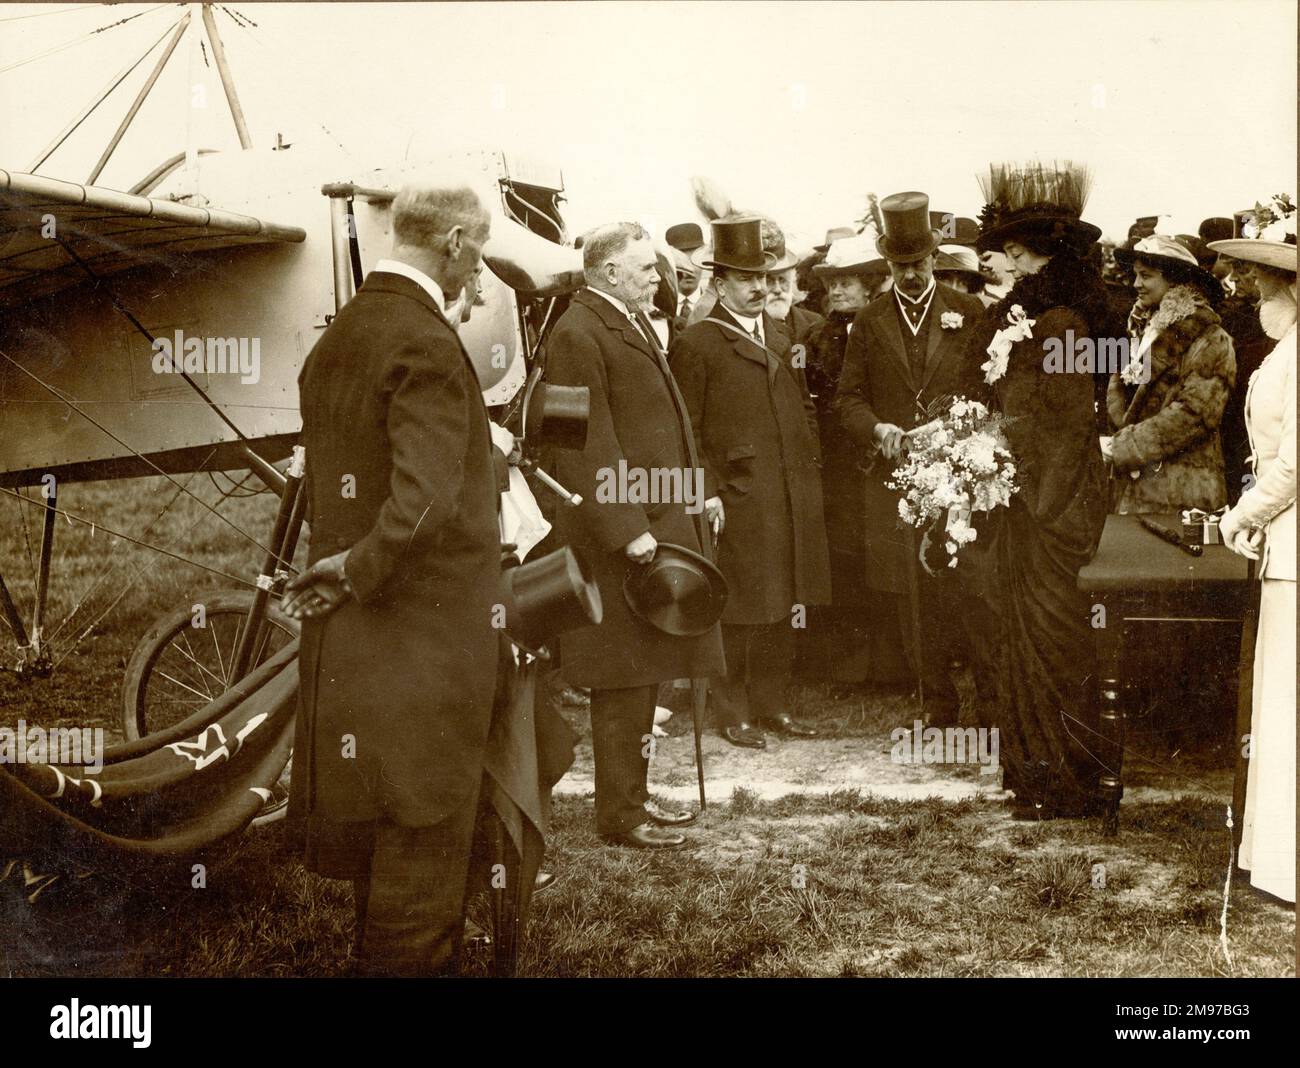 Lord and Lady Desborough at the London aerodrome dedicating a Blériot monoplane to the Australian commonwealth with Gustav Hamel, among others, at the naming ceremony of the Blériot monoplane named Britannia used by Hamel in his cross-Channel flight presented to the Government of New Zealand by agents for colonial corporations and The Standard newspaper. Stock Photo